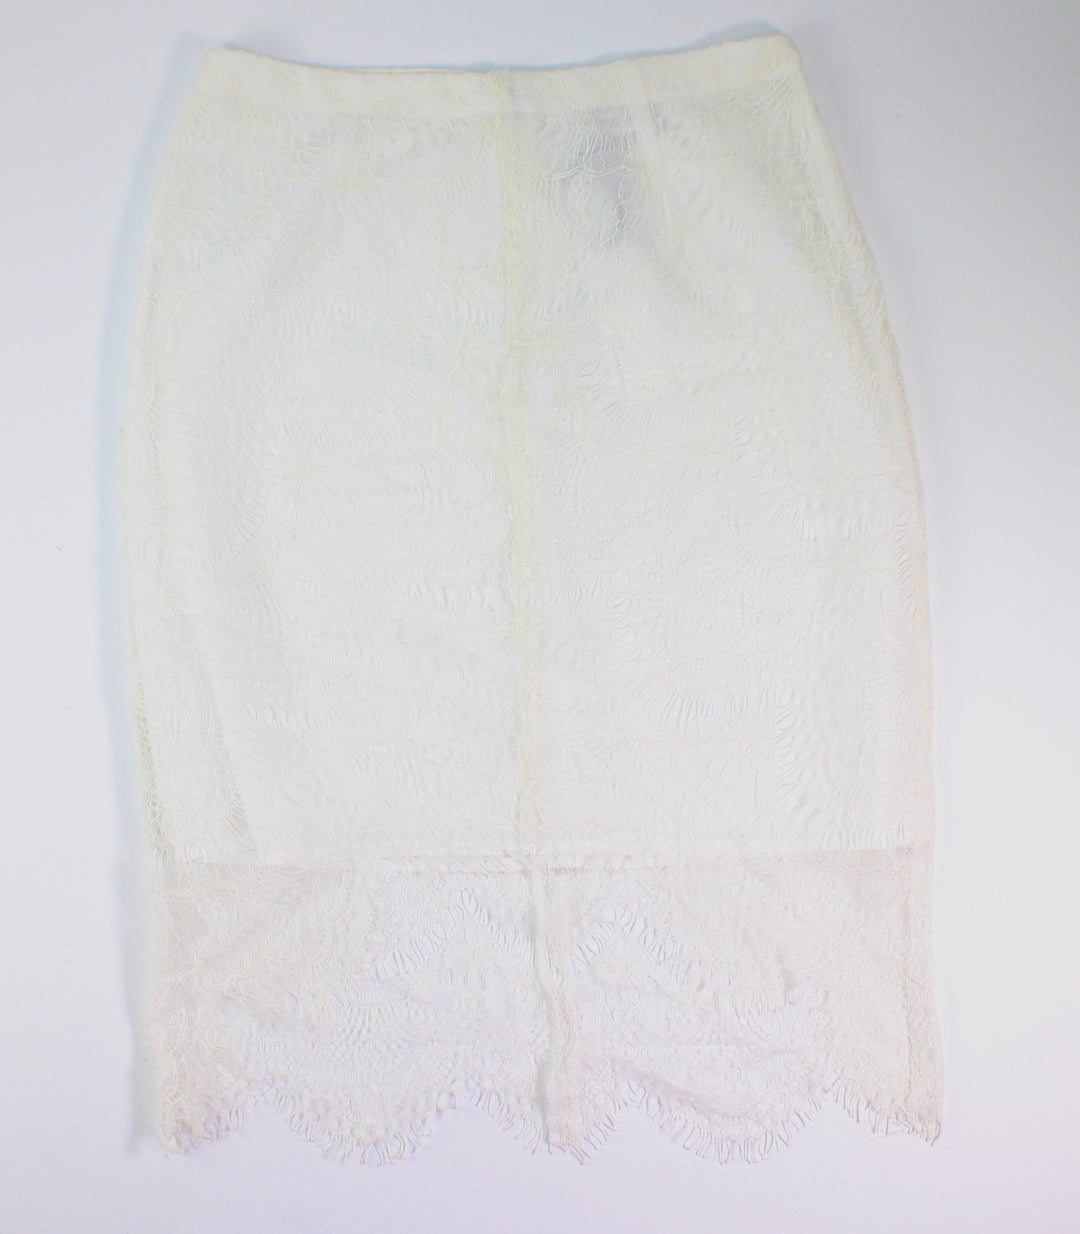 CUPCAKES & CASHMERE LACE IVORY SKIRT LADIES SIZE SMALL NEW!